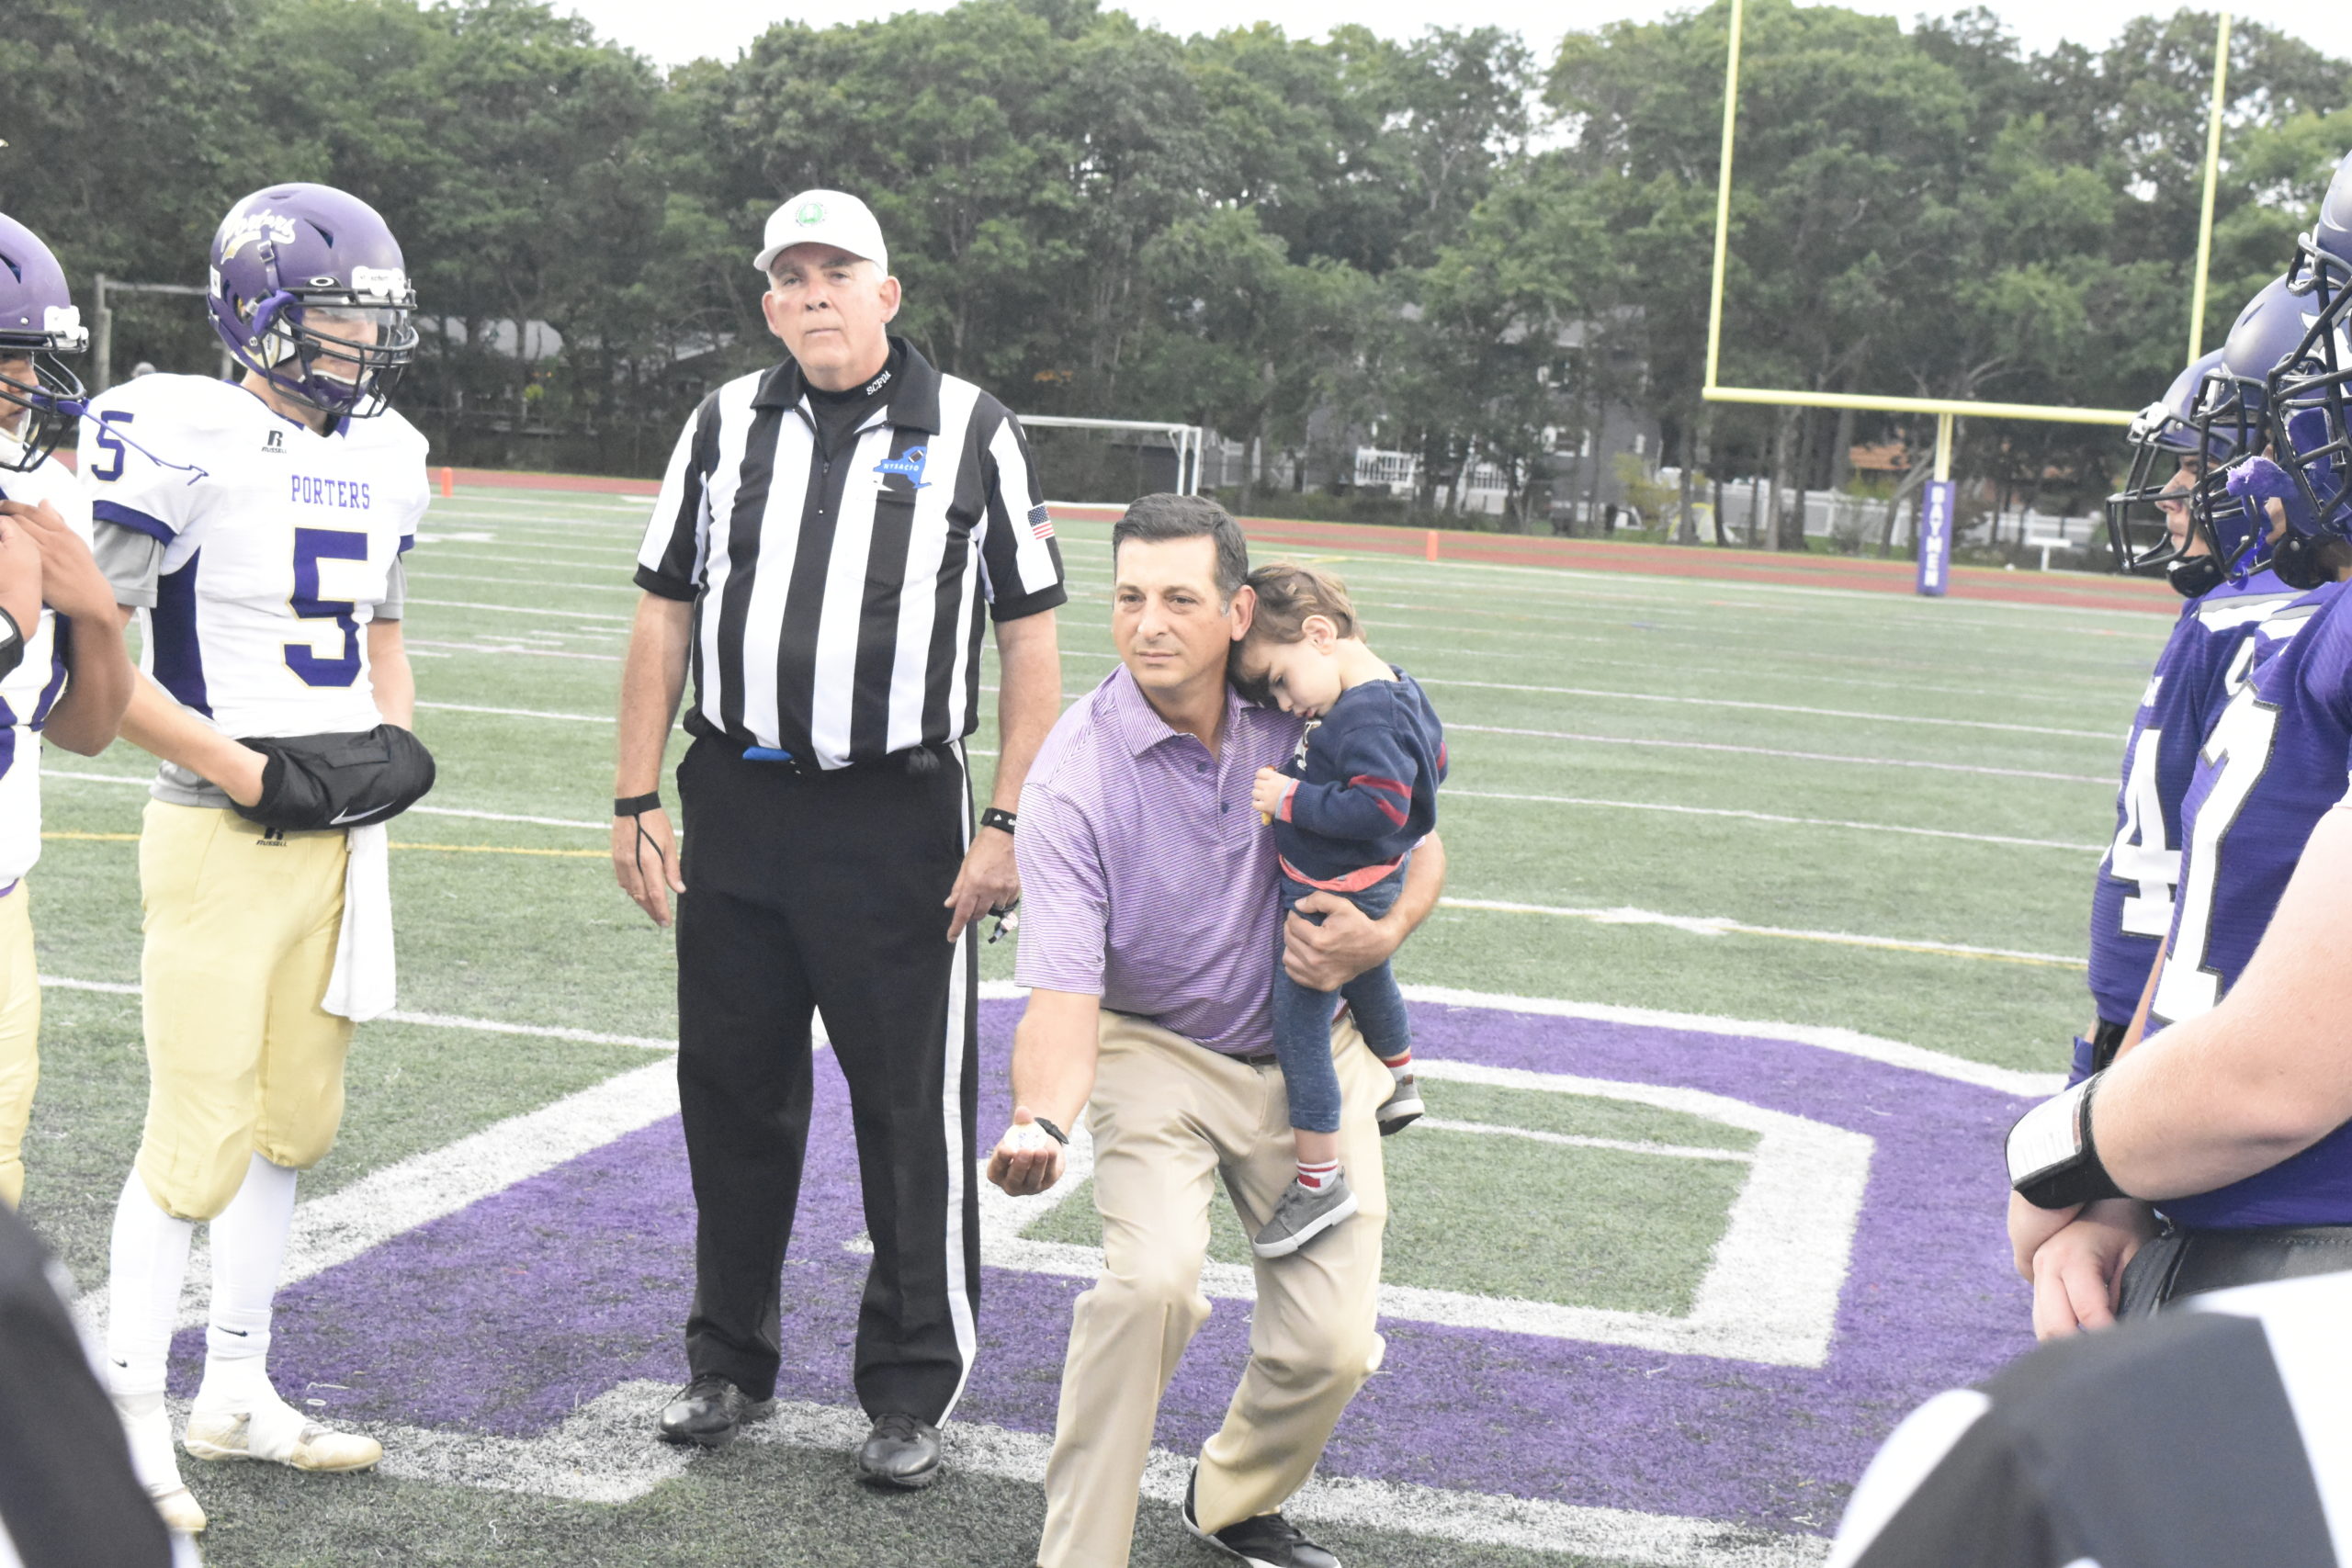 Hampton Bays alum Evan Hillen did the coin toss prior to Friday's football game.